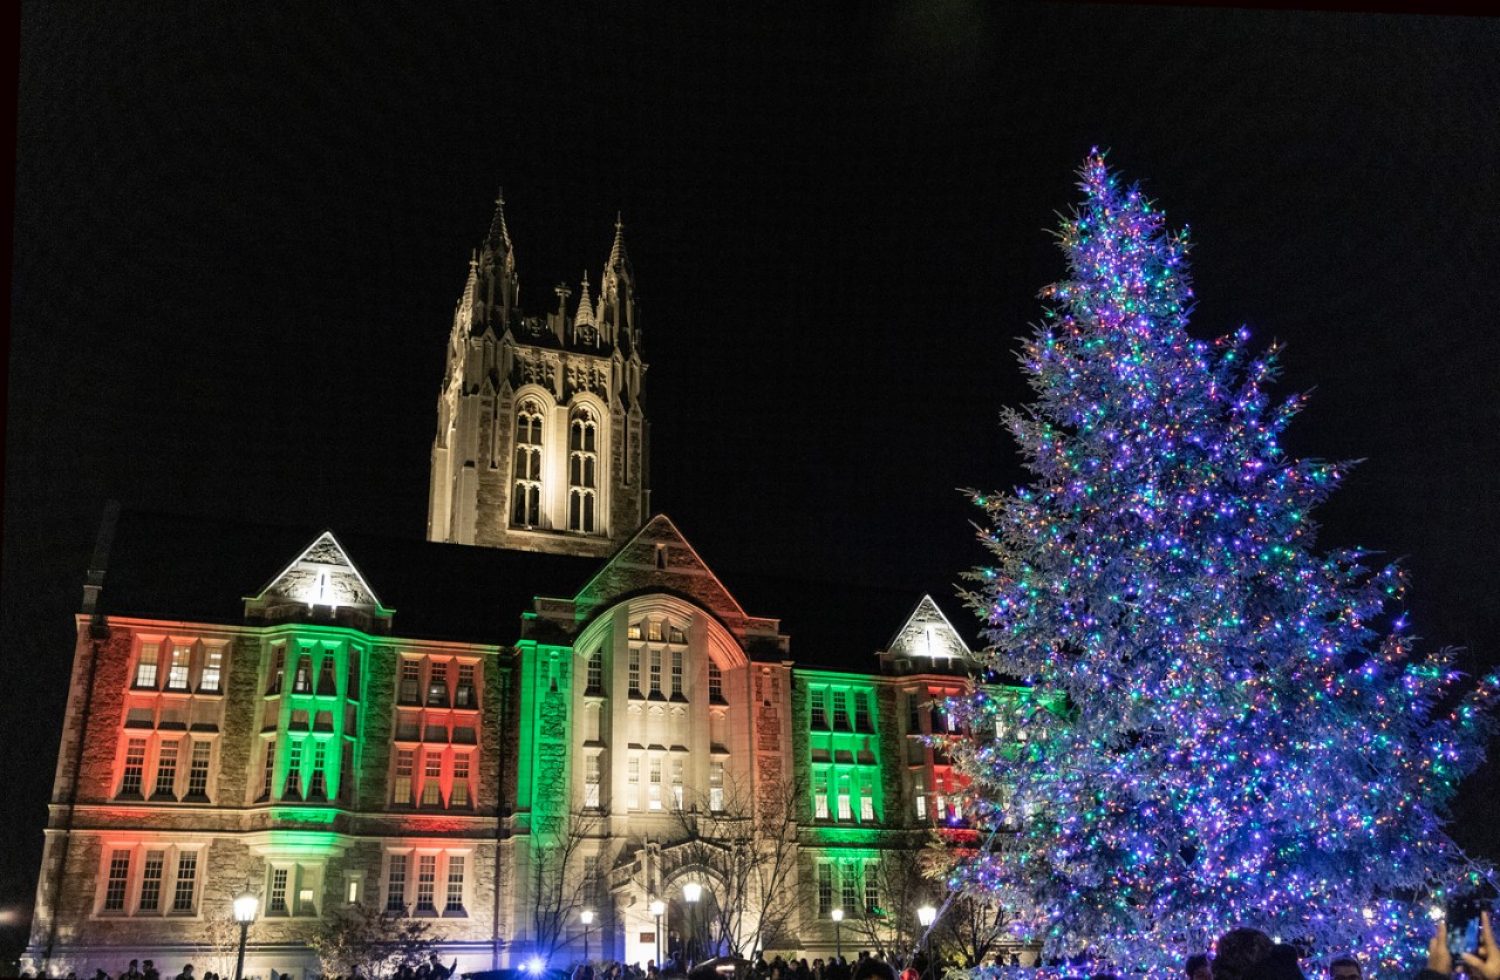 Gasson Hall and trees with holiday lights